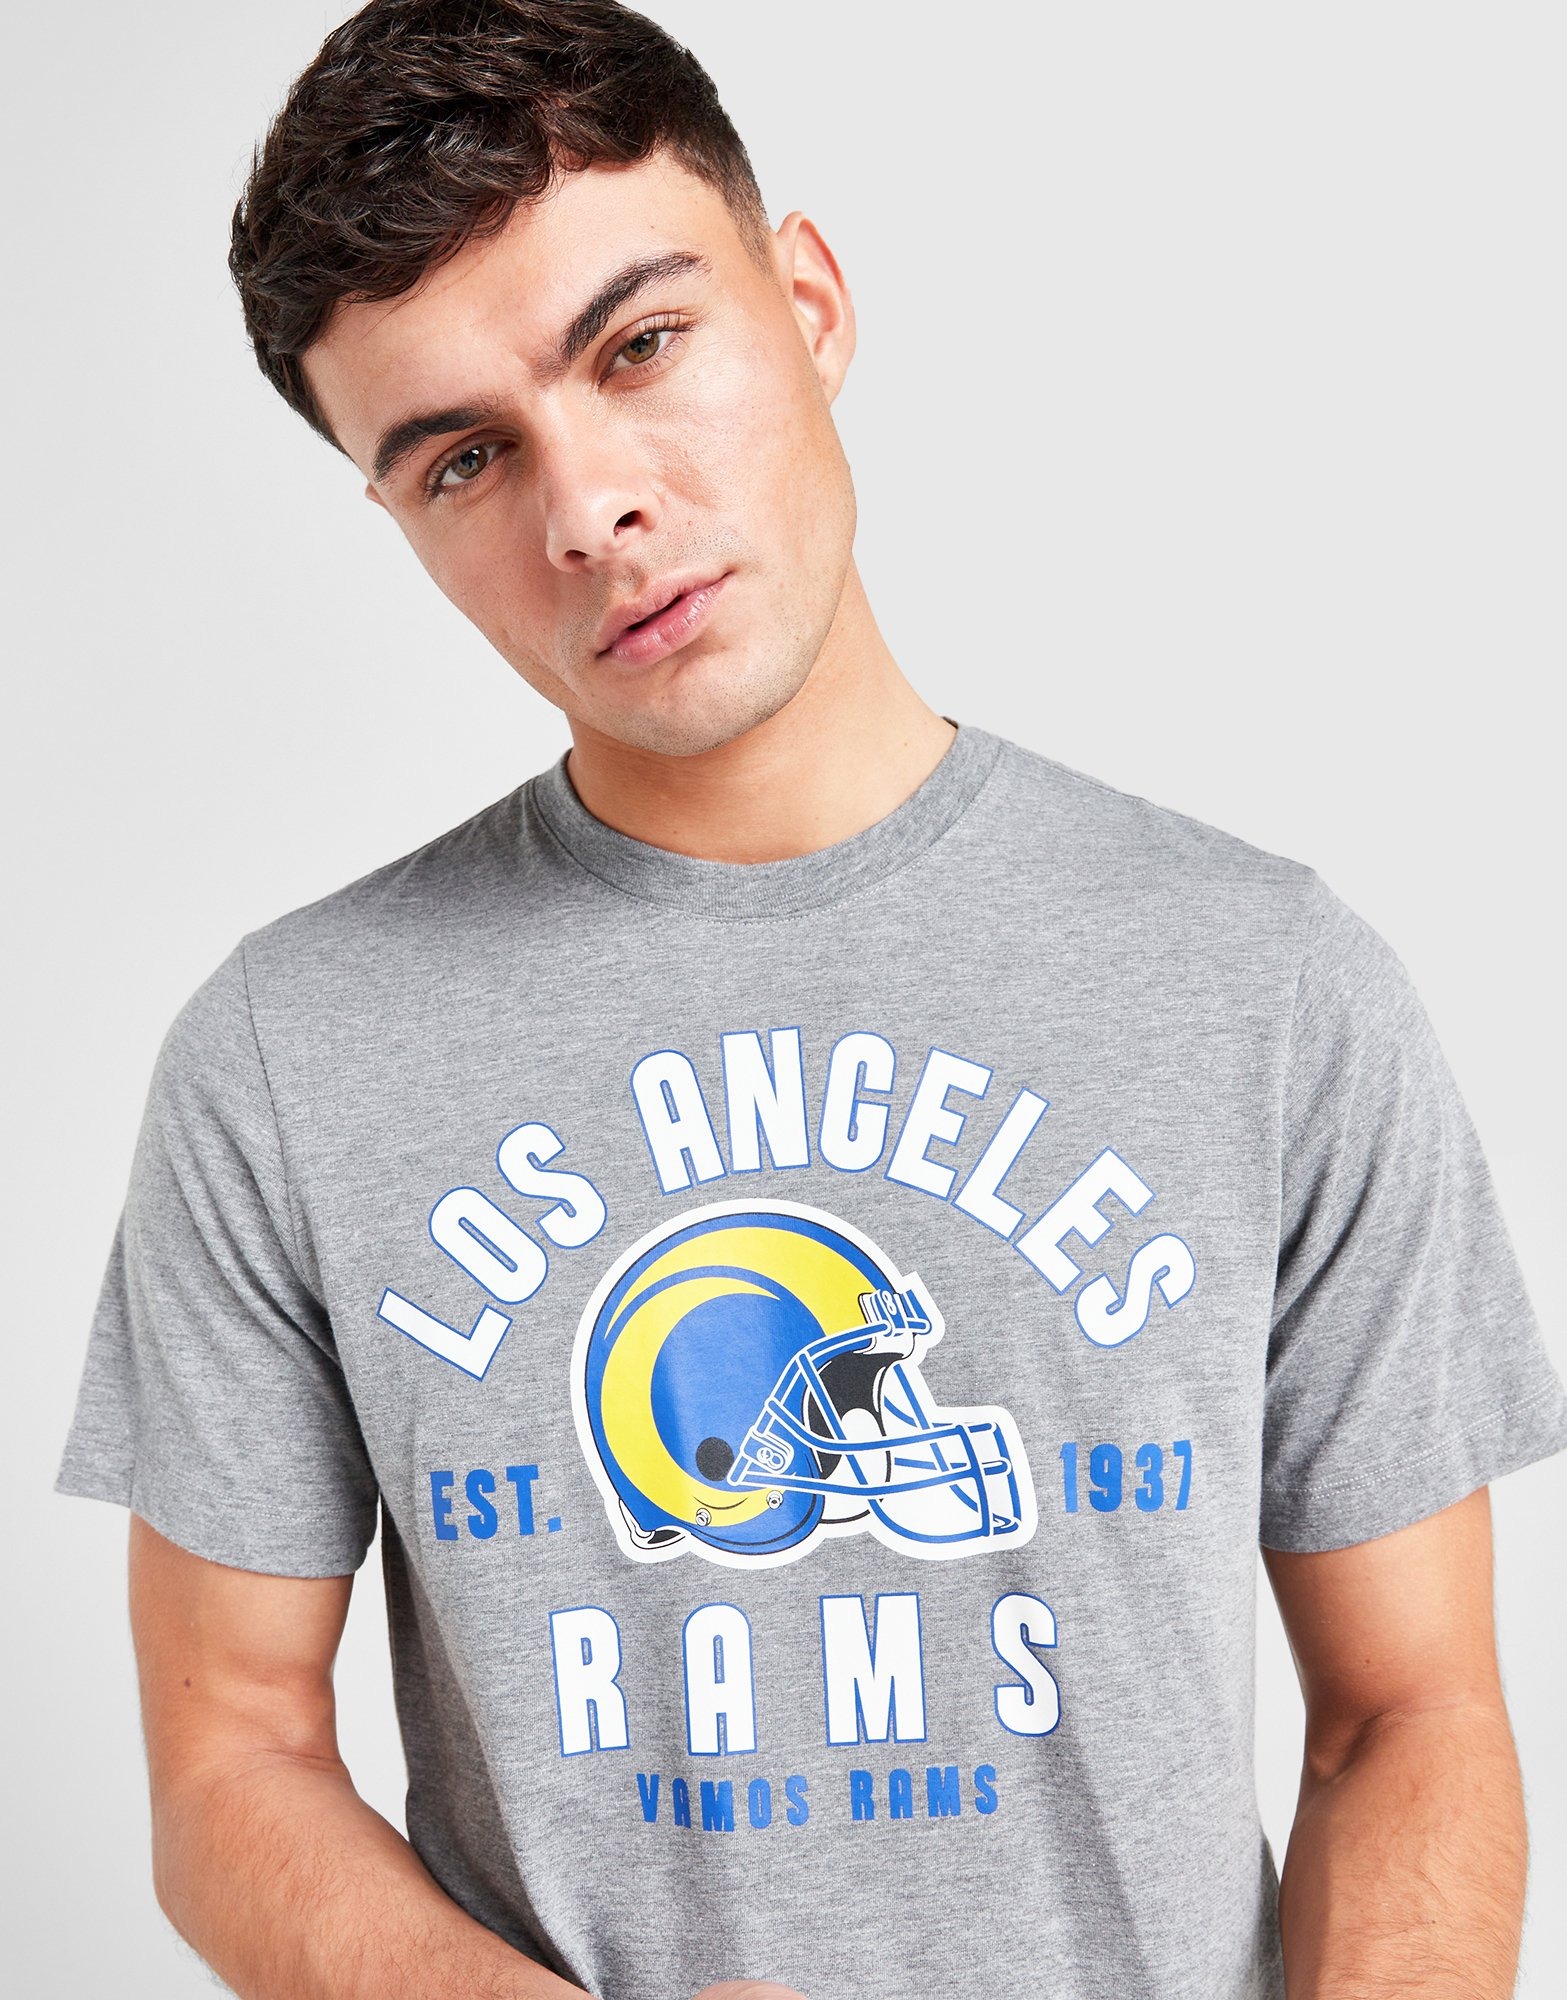 Nike Men's Athletic Fashion (nfl Los Angeles Rams) Long-sleeve T-shirt In  White